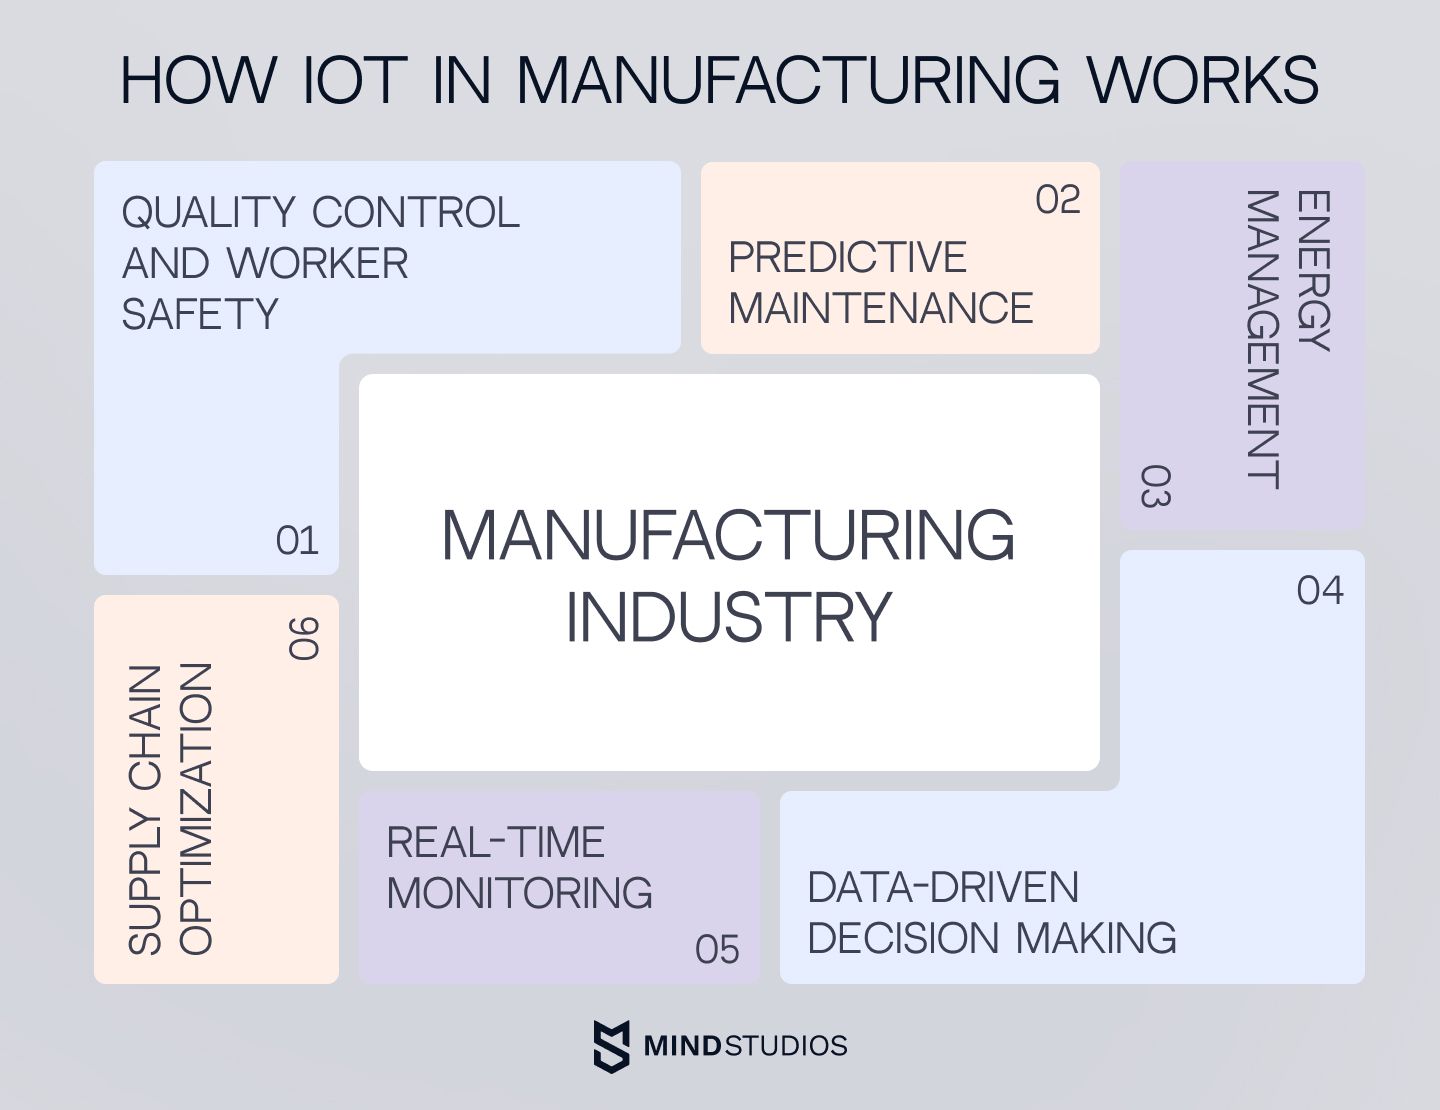 How IoT in manufacturing works